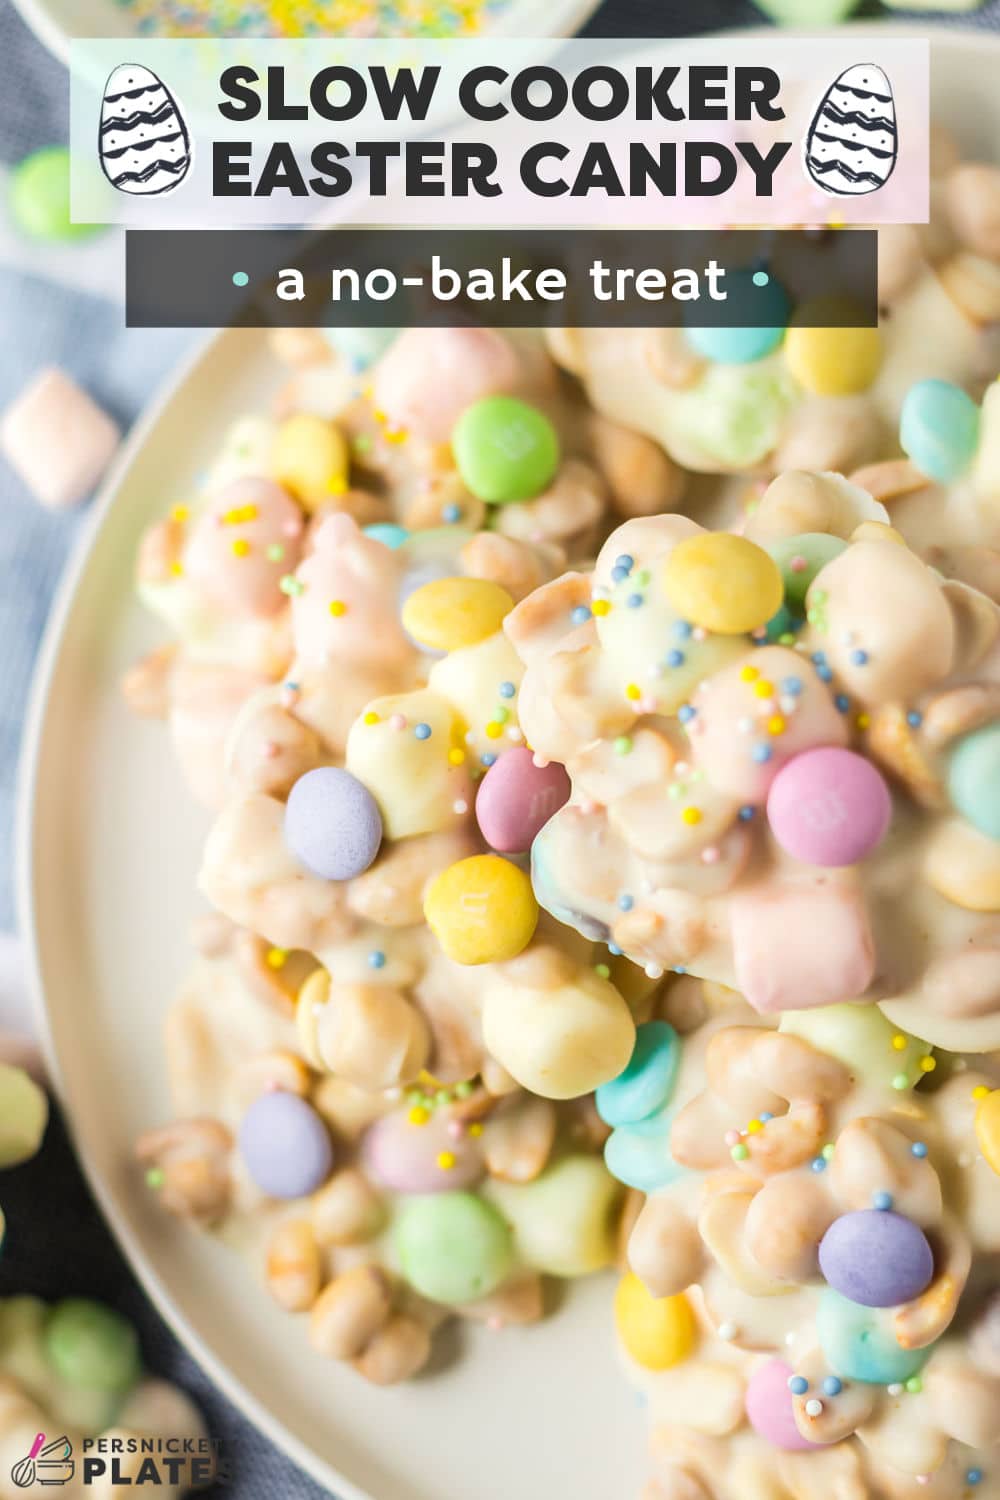 Easy Slow Cooker Easter Candy is classic white crockpot candy flecked with fruit-flavored mini marshmallows, pastel-colored M&Ms, and loaded with roasted peanuts. Topped with festive easter holiday sprinkles, these no-bake treats are always the first to disappear! | www.persnicketyplates.com